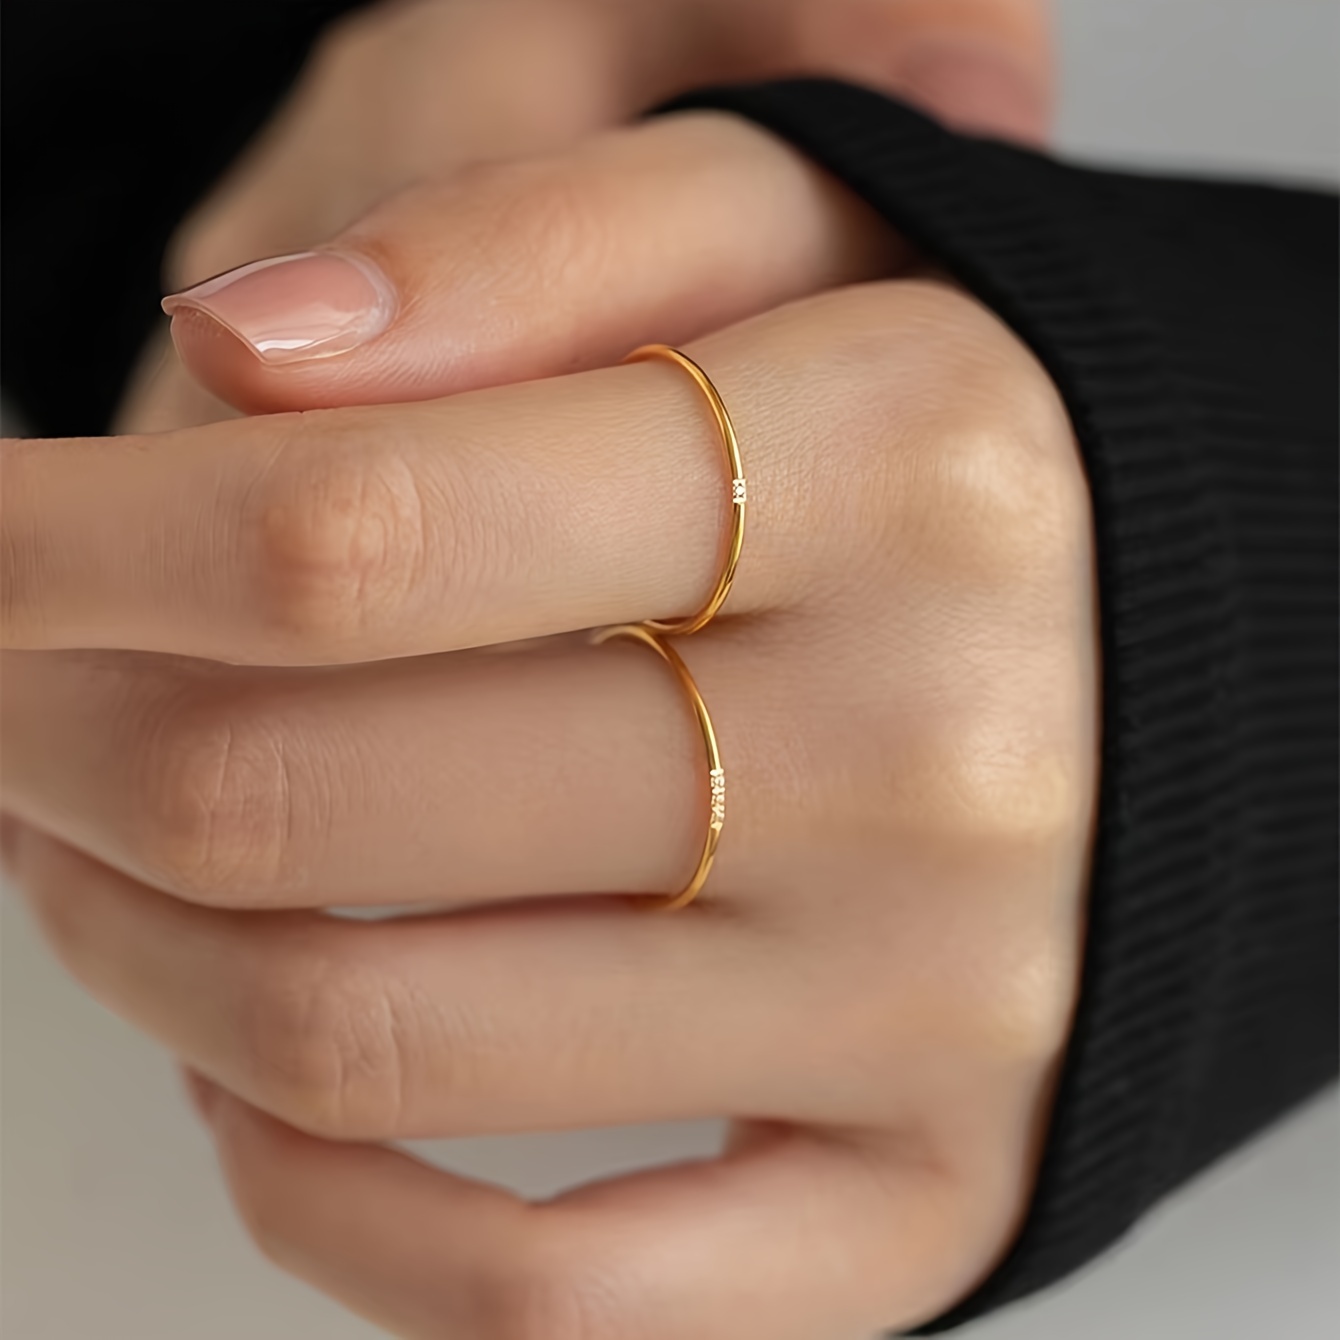 Minimalist Jewlery18k Gold Plated Stainless Steel Stackable Rings